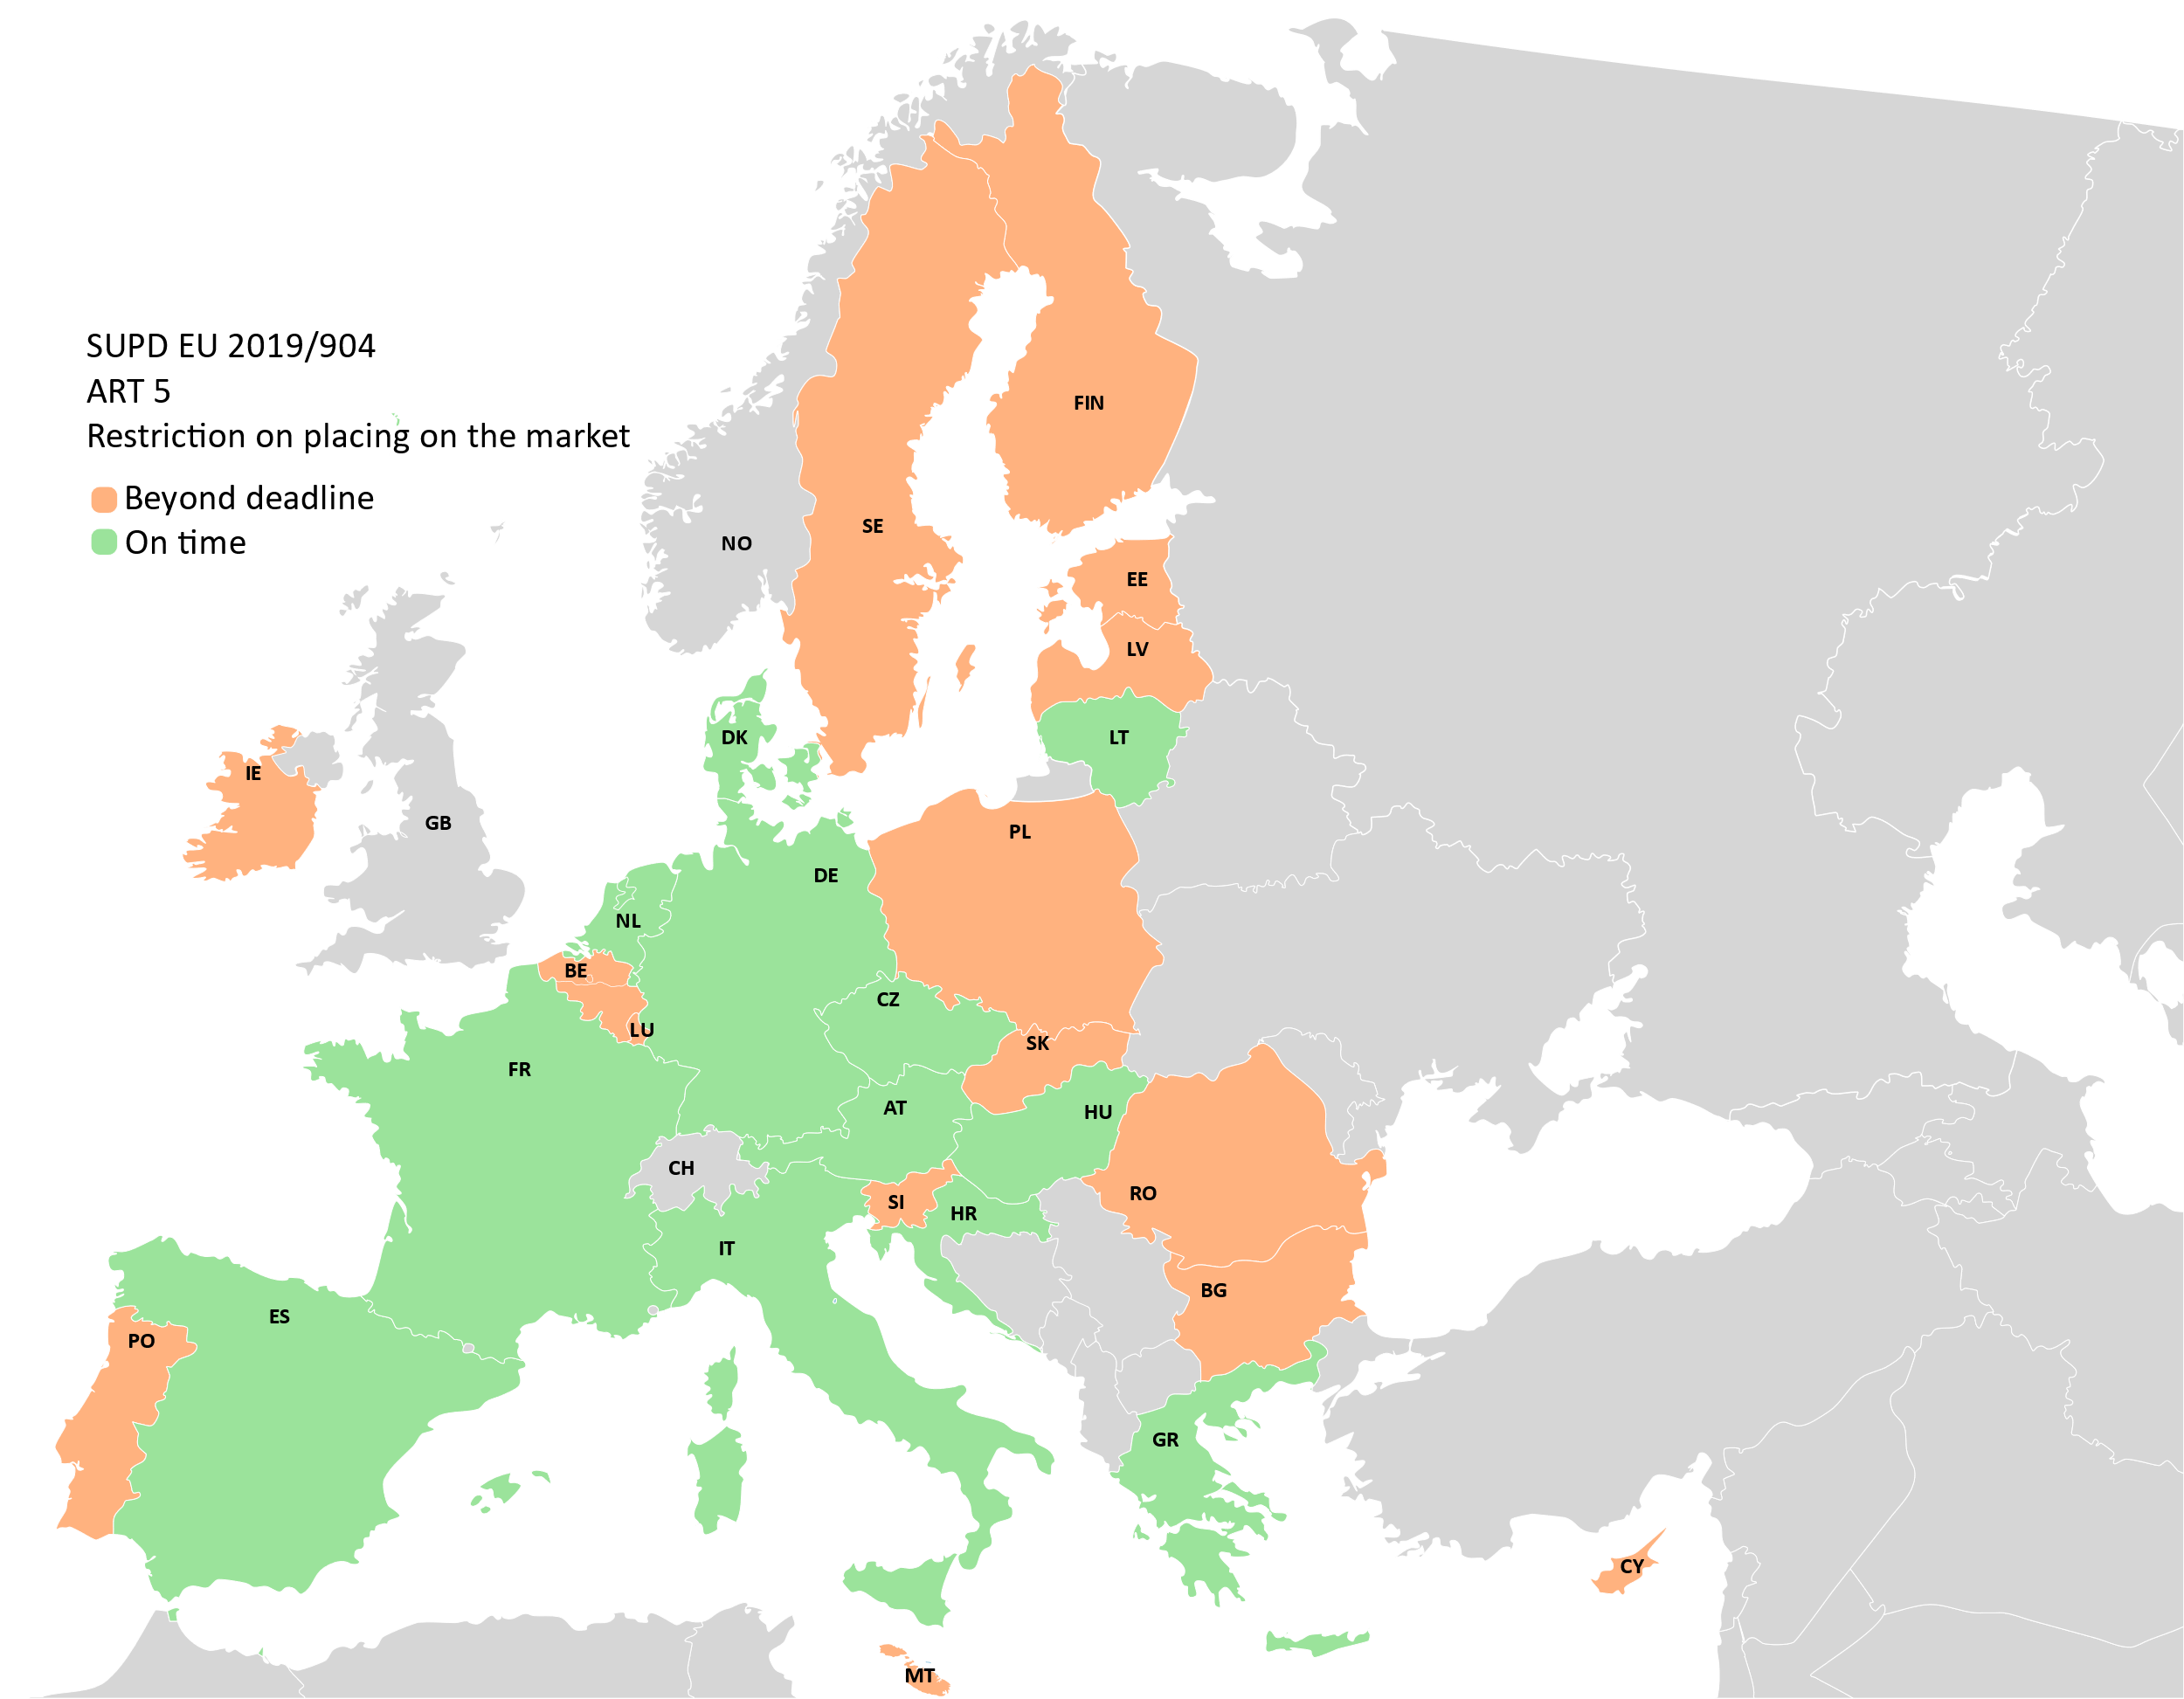 Overview of the SUPD Implementation Across Europe.